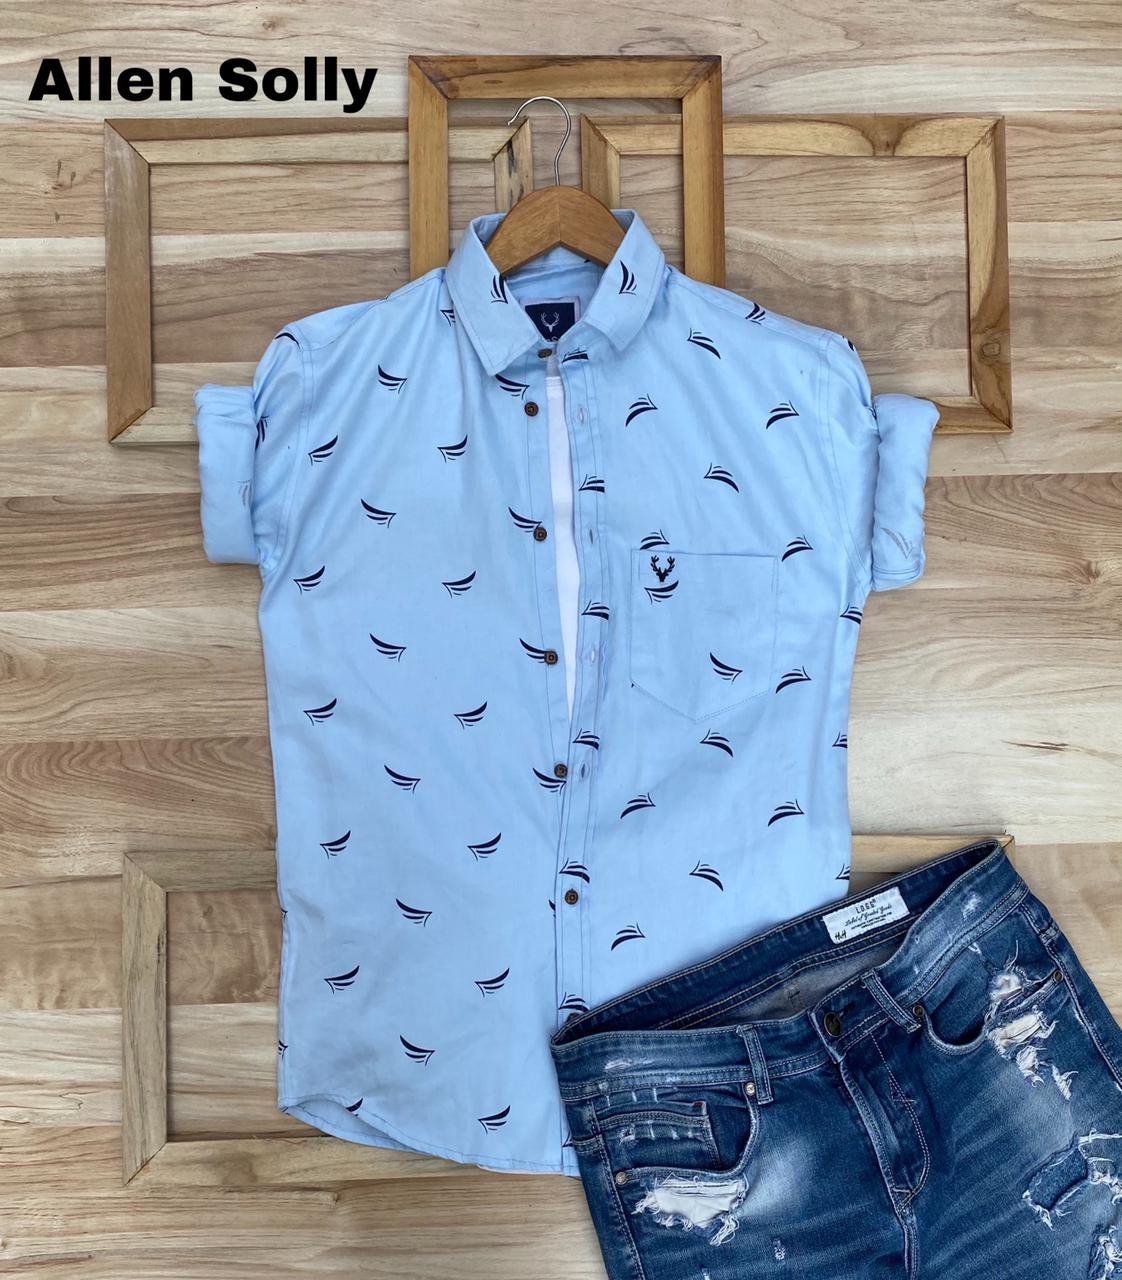 Allen Solly - A check shirt in contrast colour is an effortless way to  elevate your casual look, provided you find the right dark wash denim to go  with it. Shop Here:-